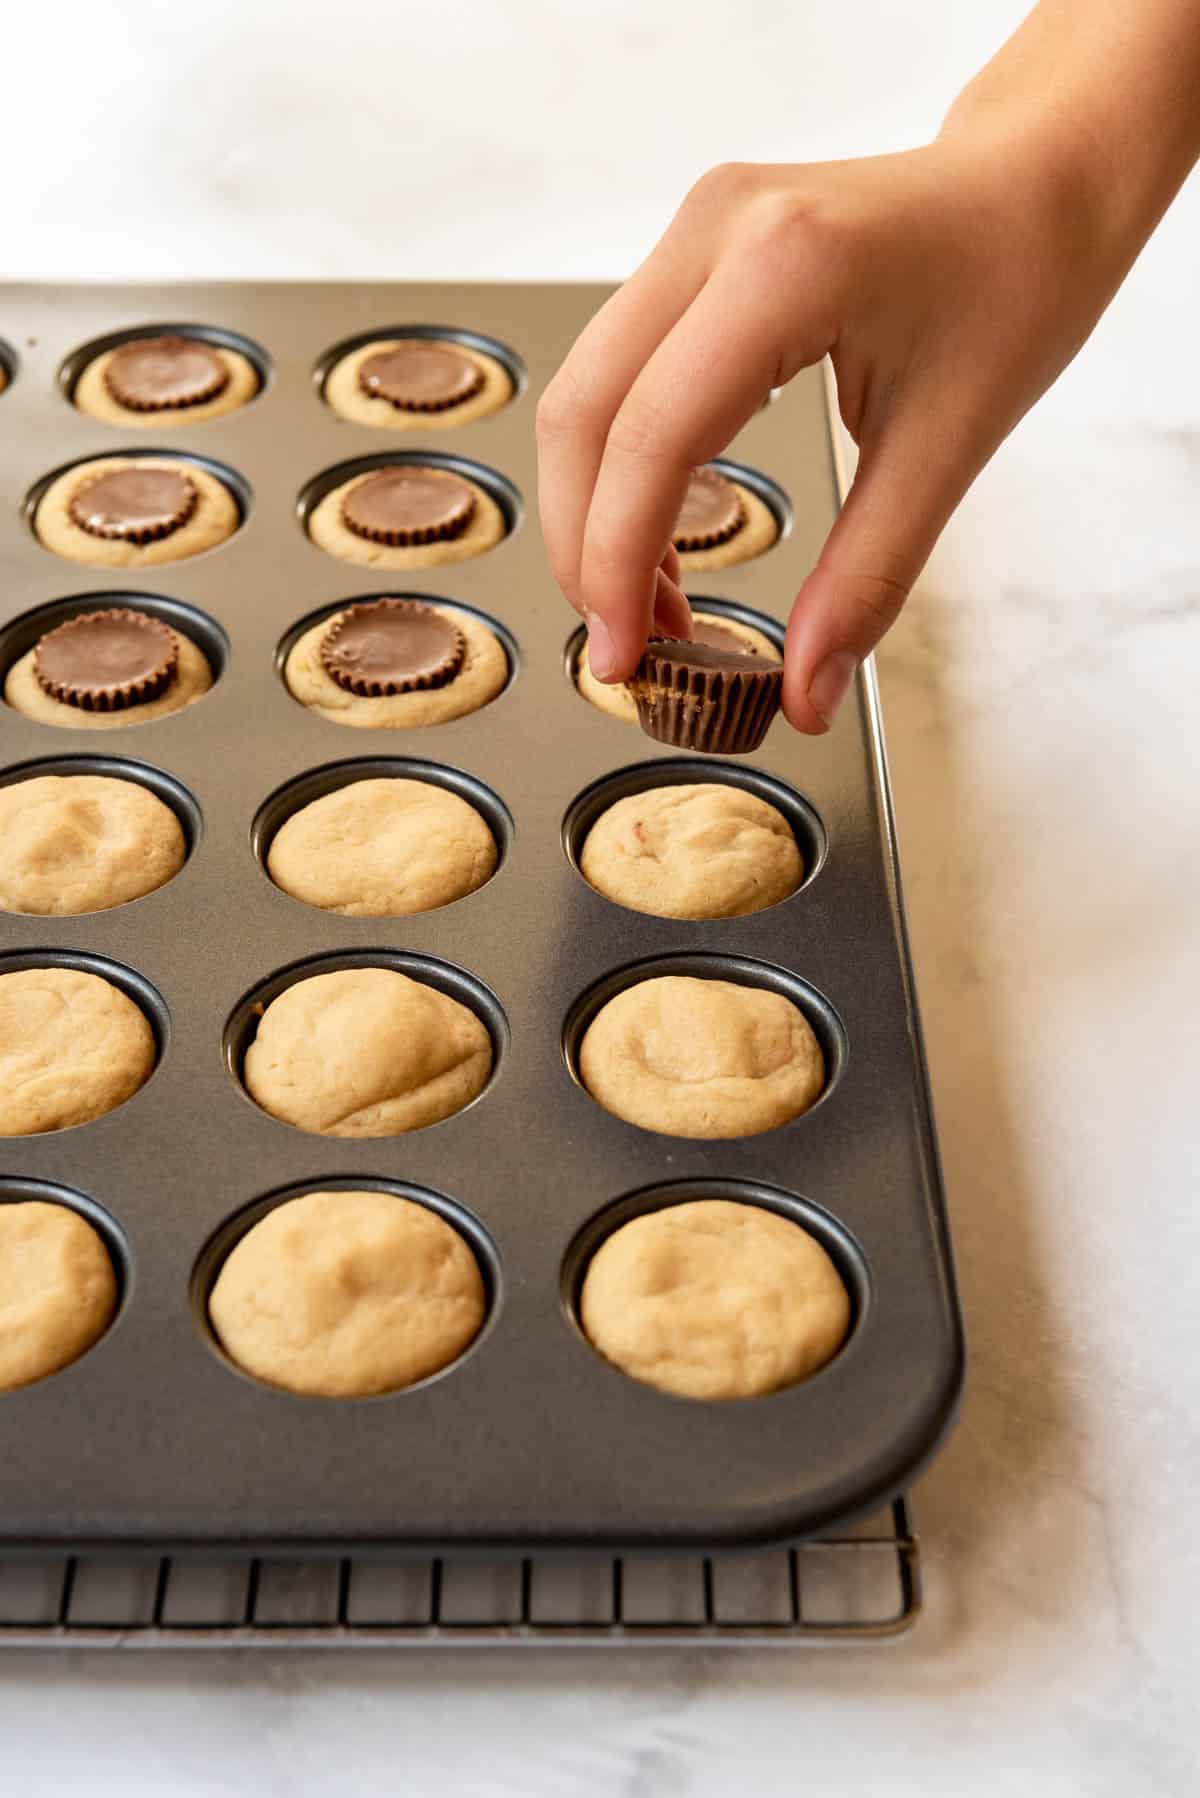 A hand holding an unwrapped mini Reese's peanut butter cup over a tray of baked peanut butter cookies.